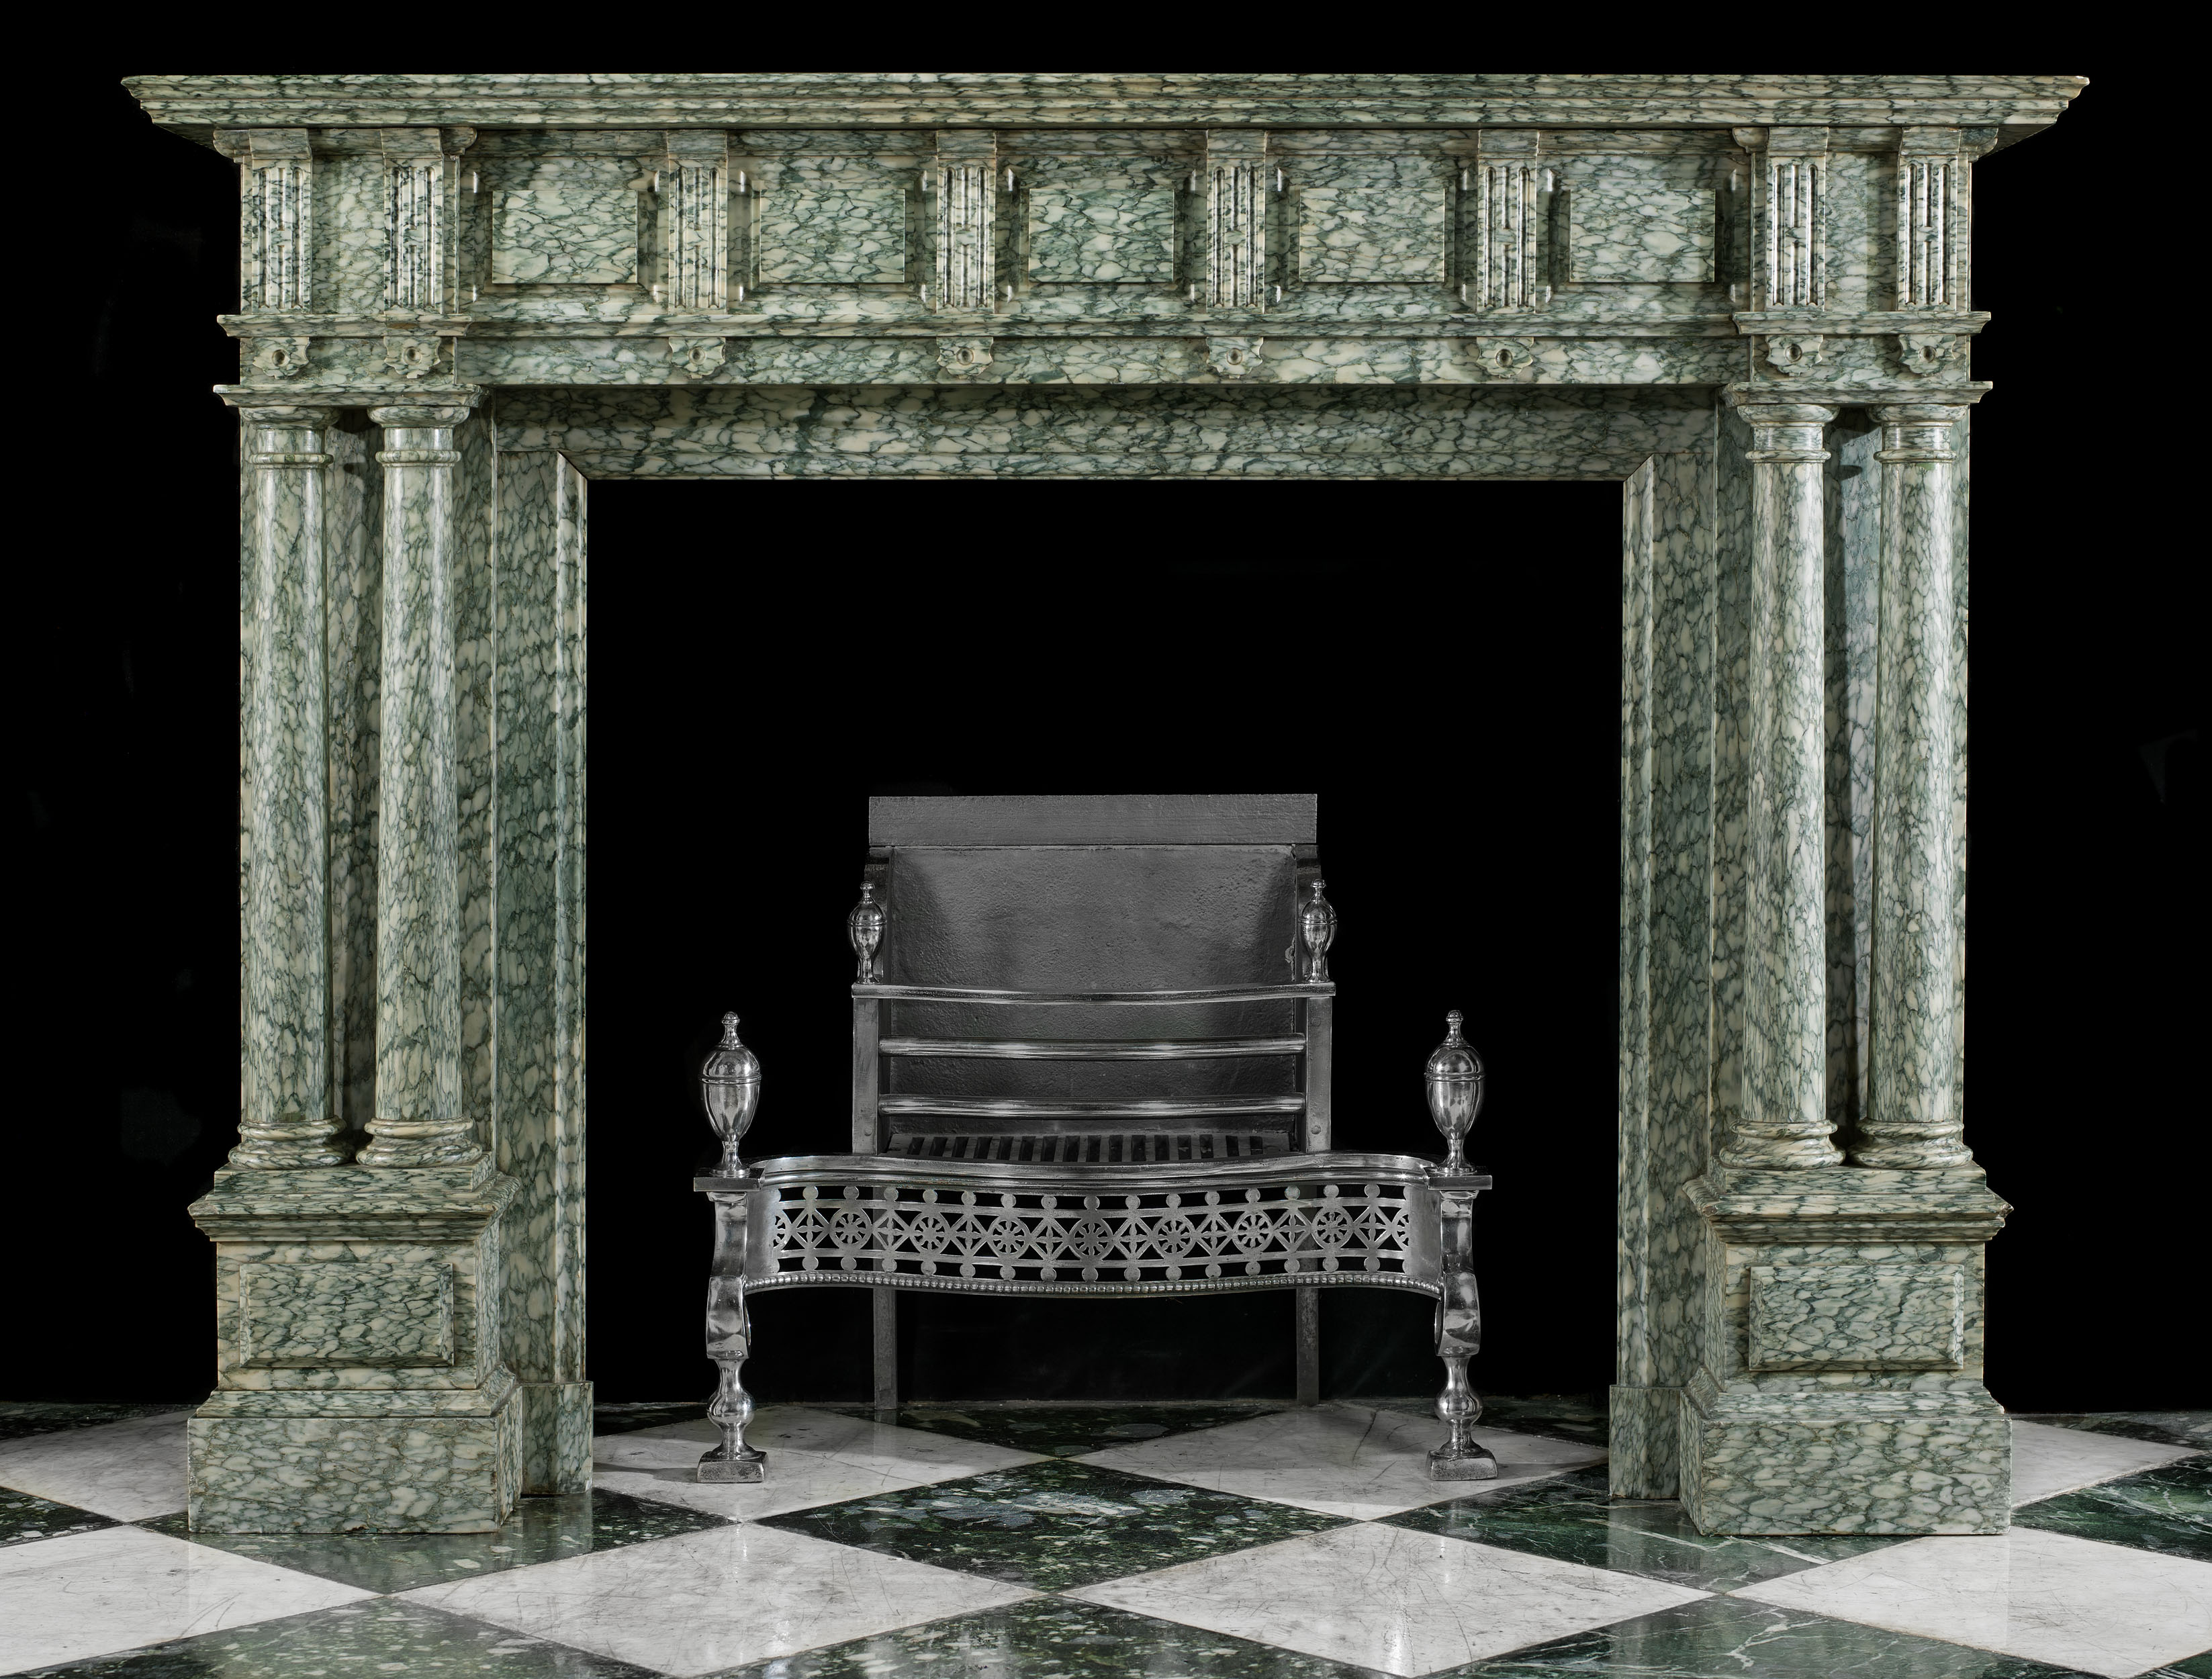 A substantial, columned antique chimneypiece in the Palladian style